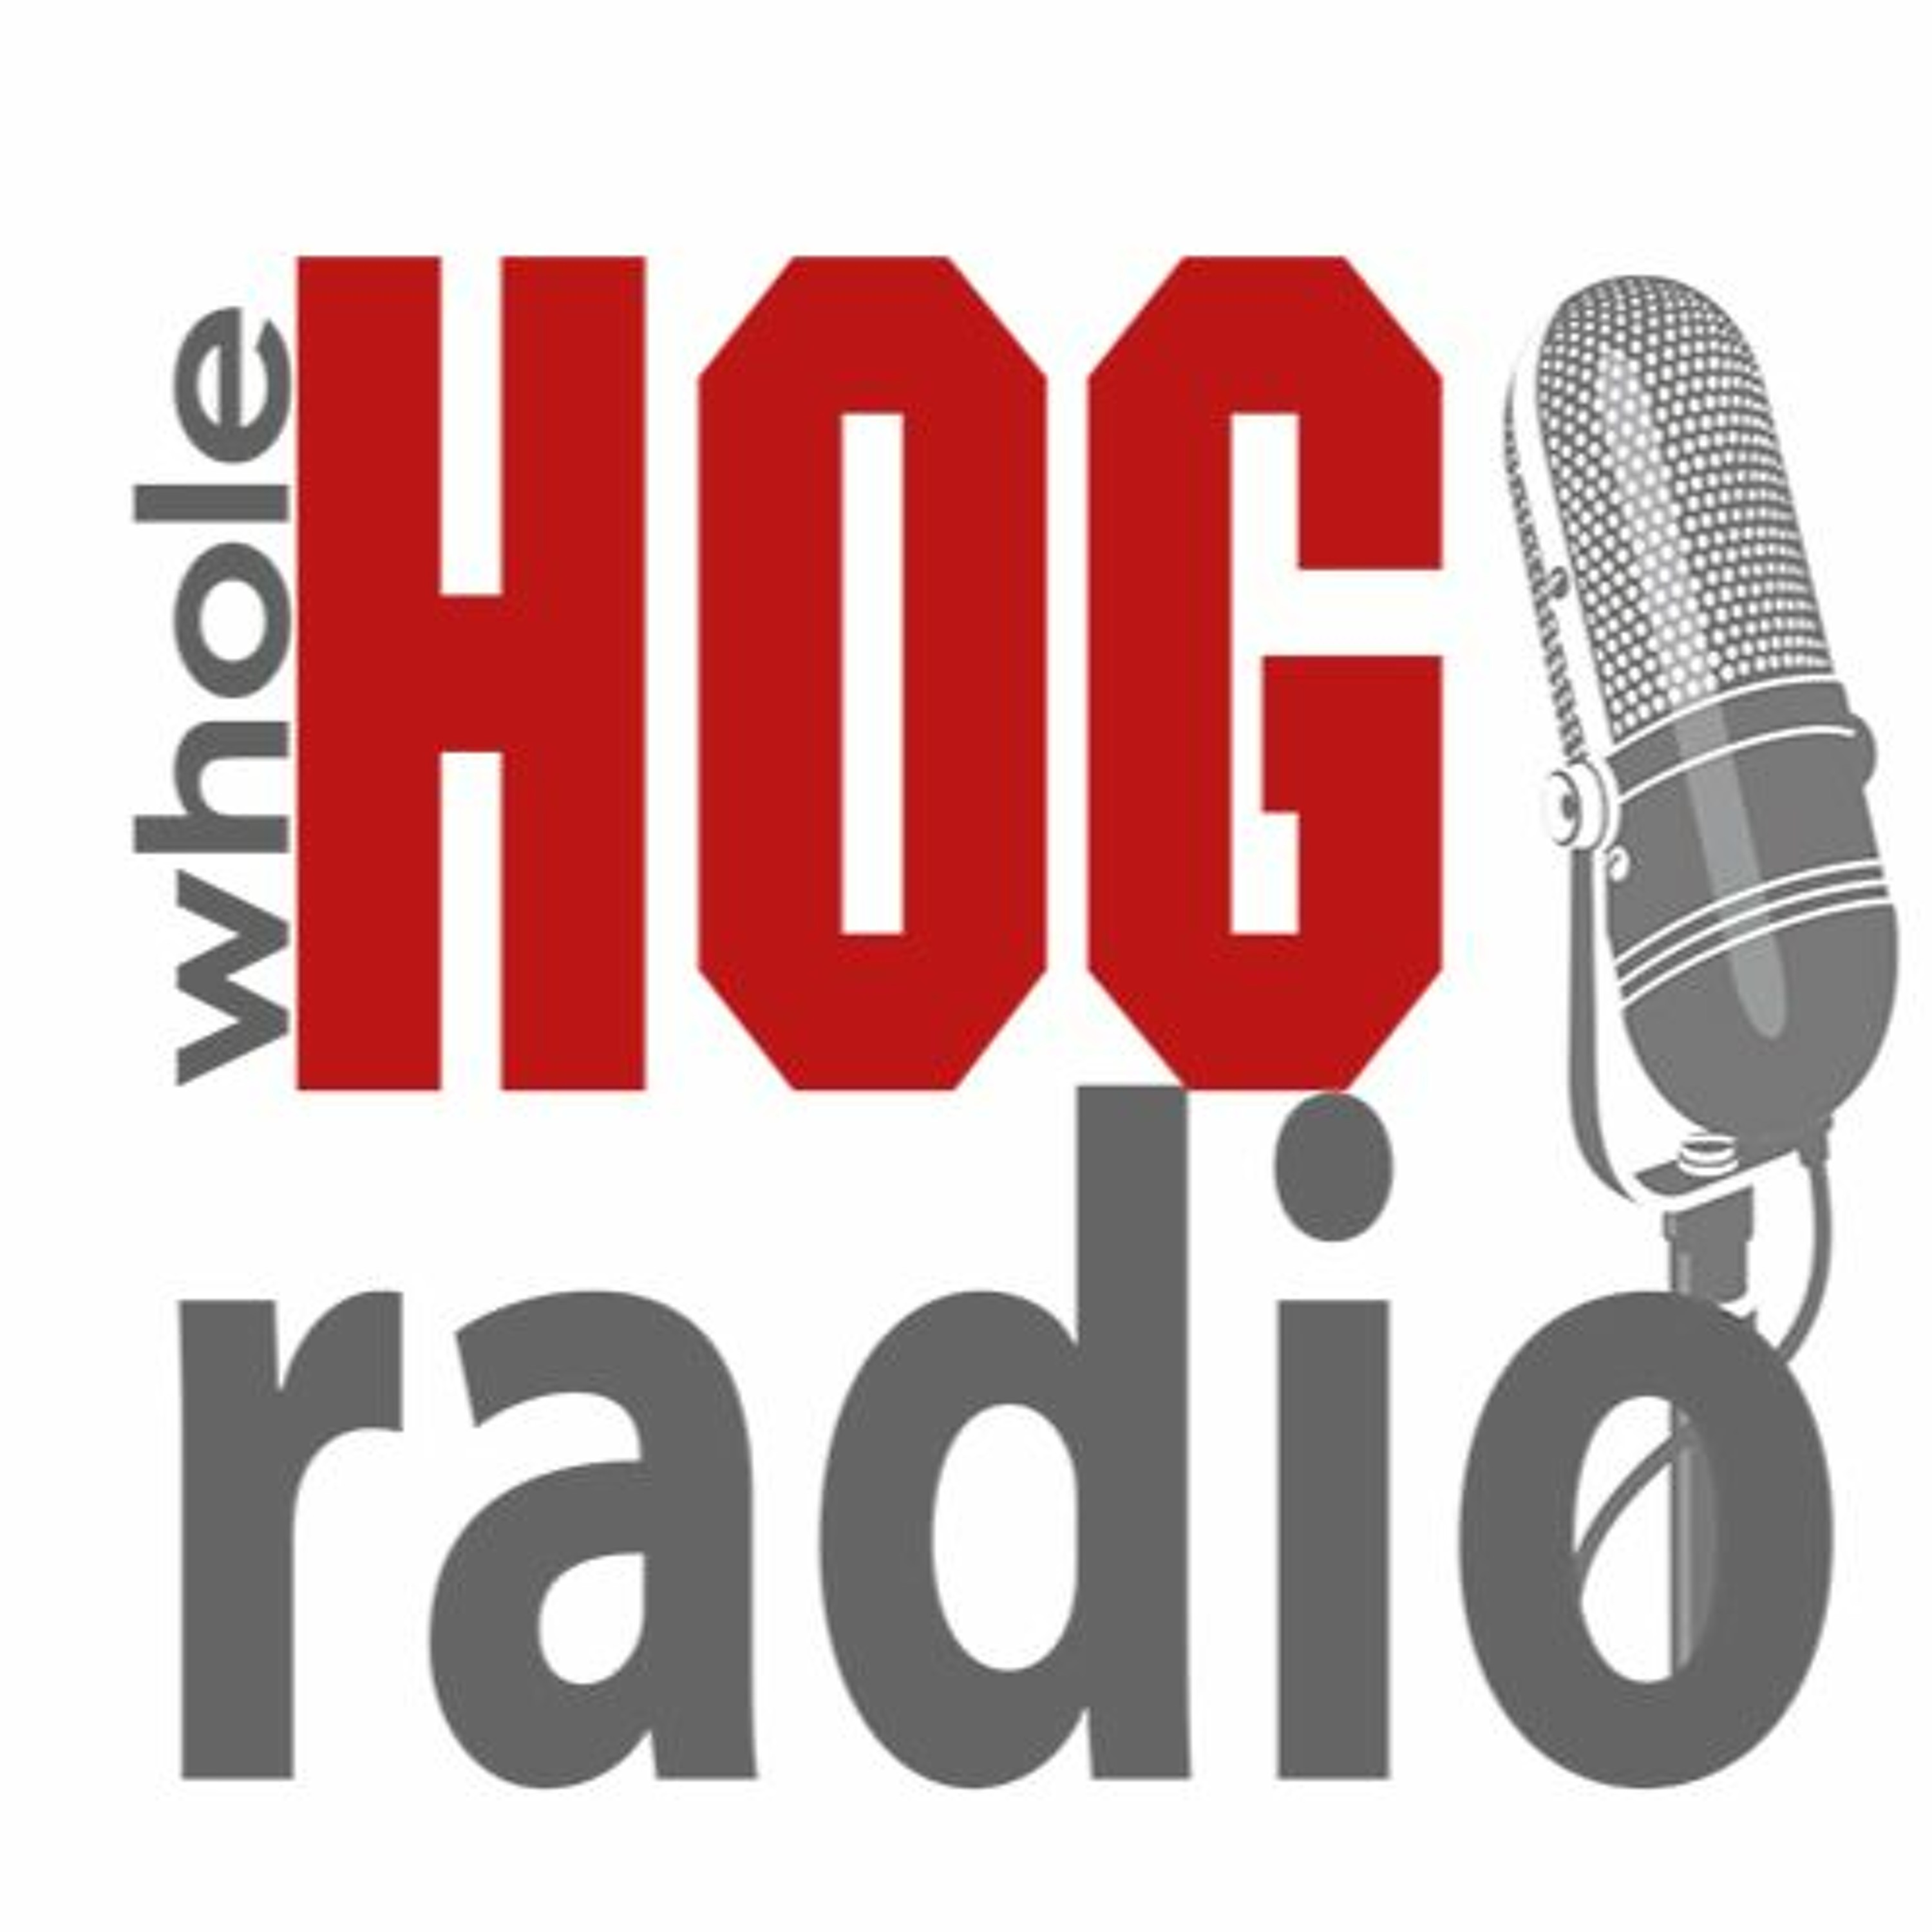 WholeHog Radio Presents: The Basketball Podcast Of Mid-America. Hogs move to 8-0